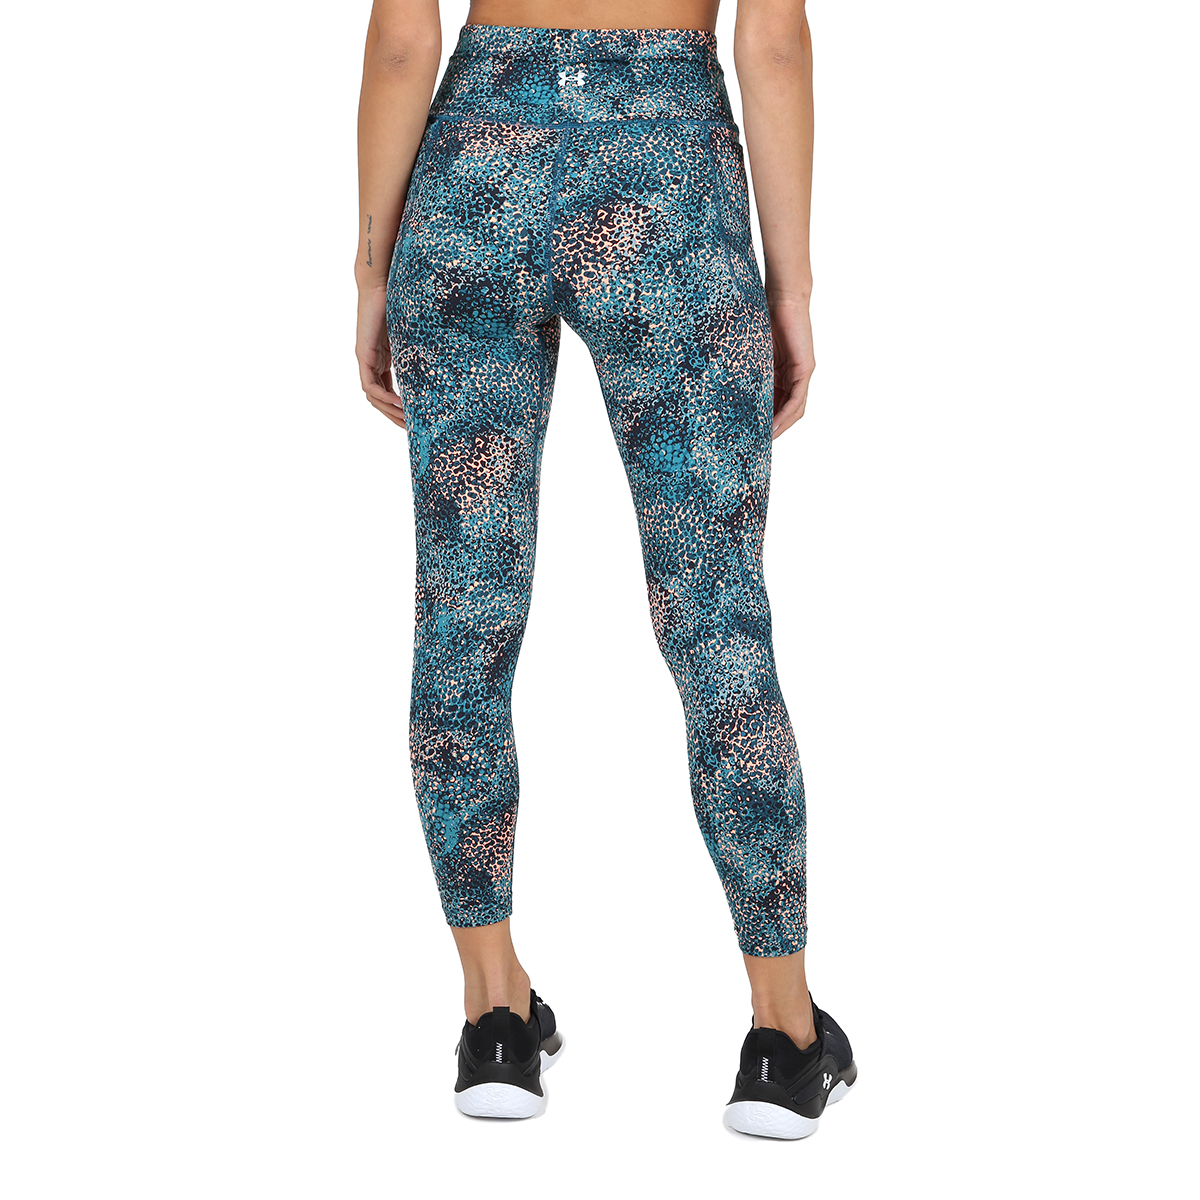 Calza Entrenamiento Under Armour Meridian Print Mujer,  image number null